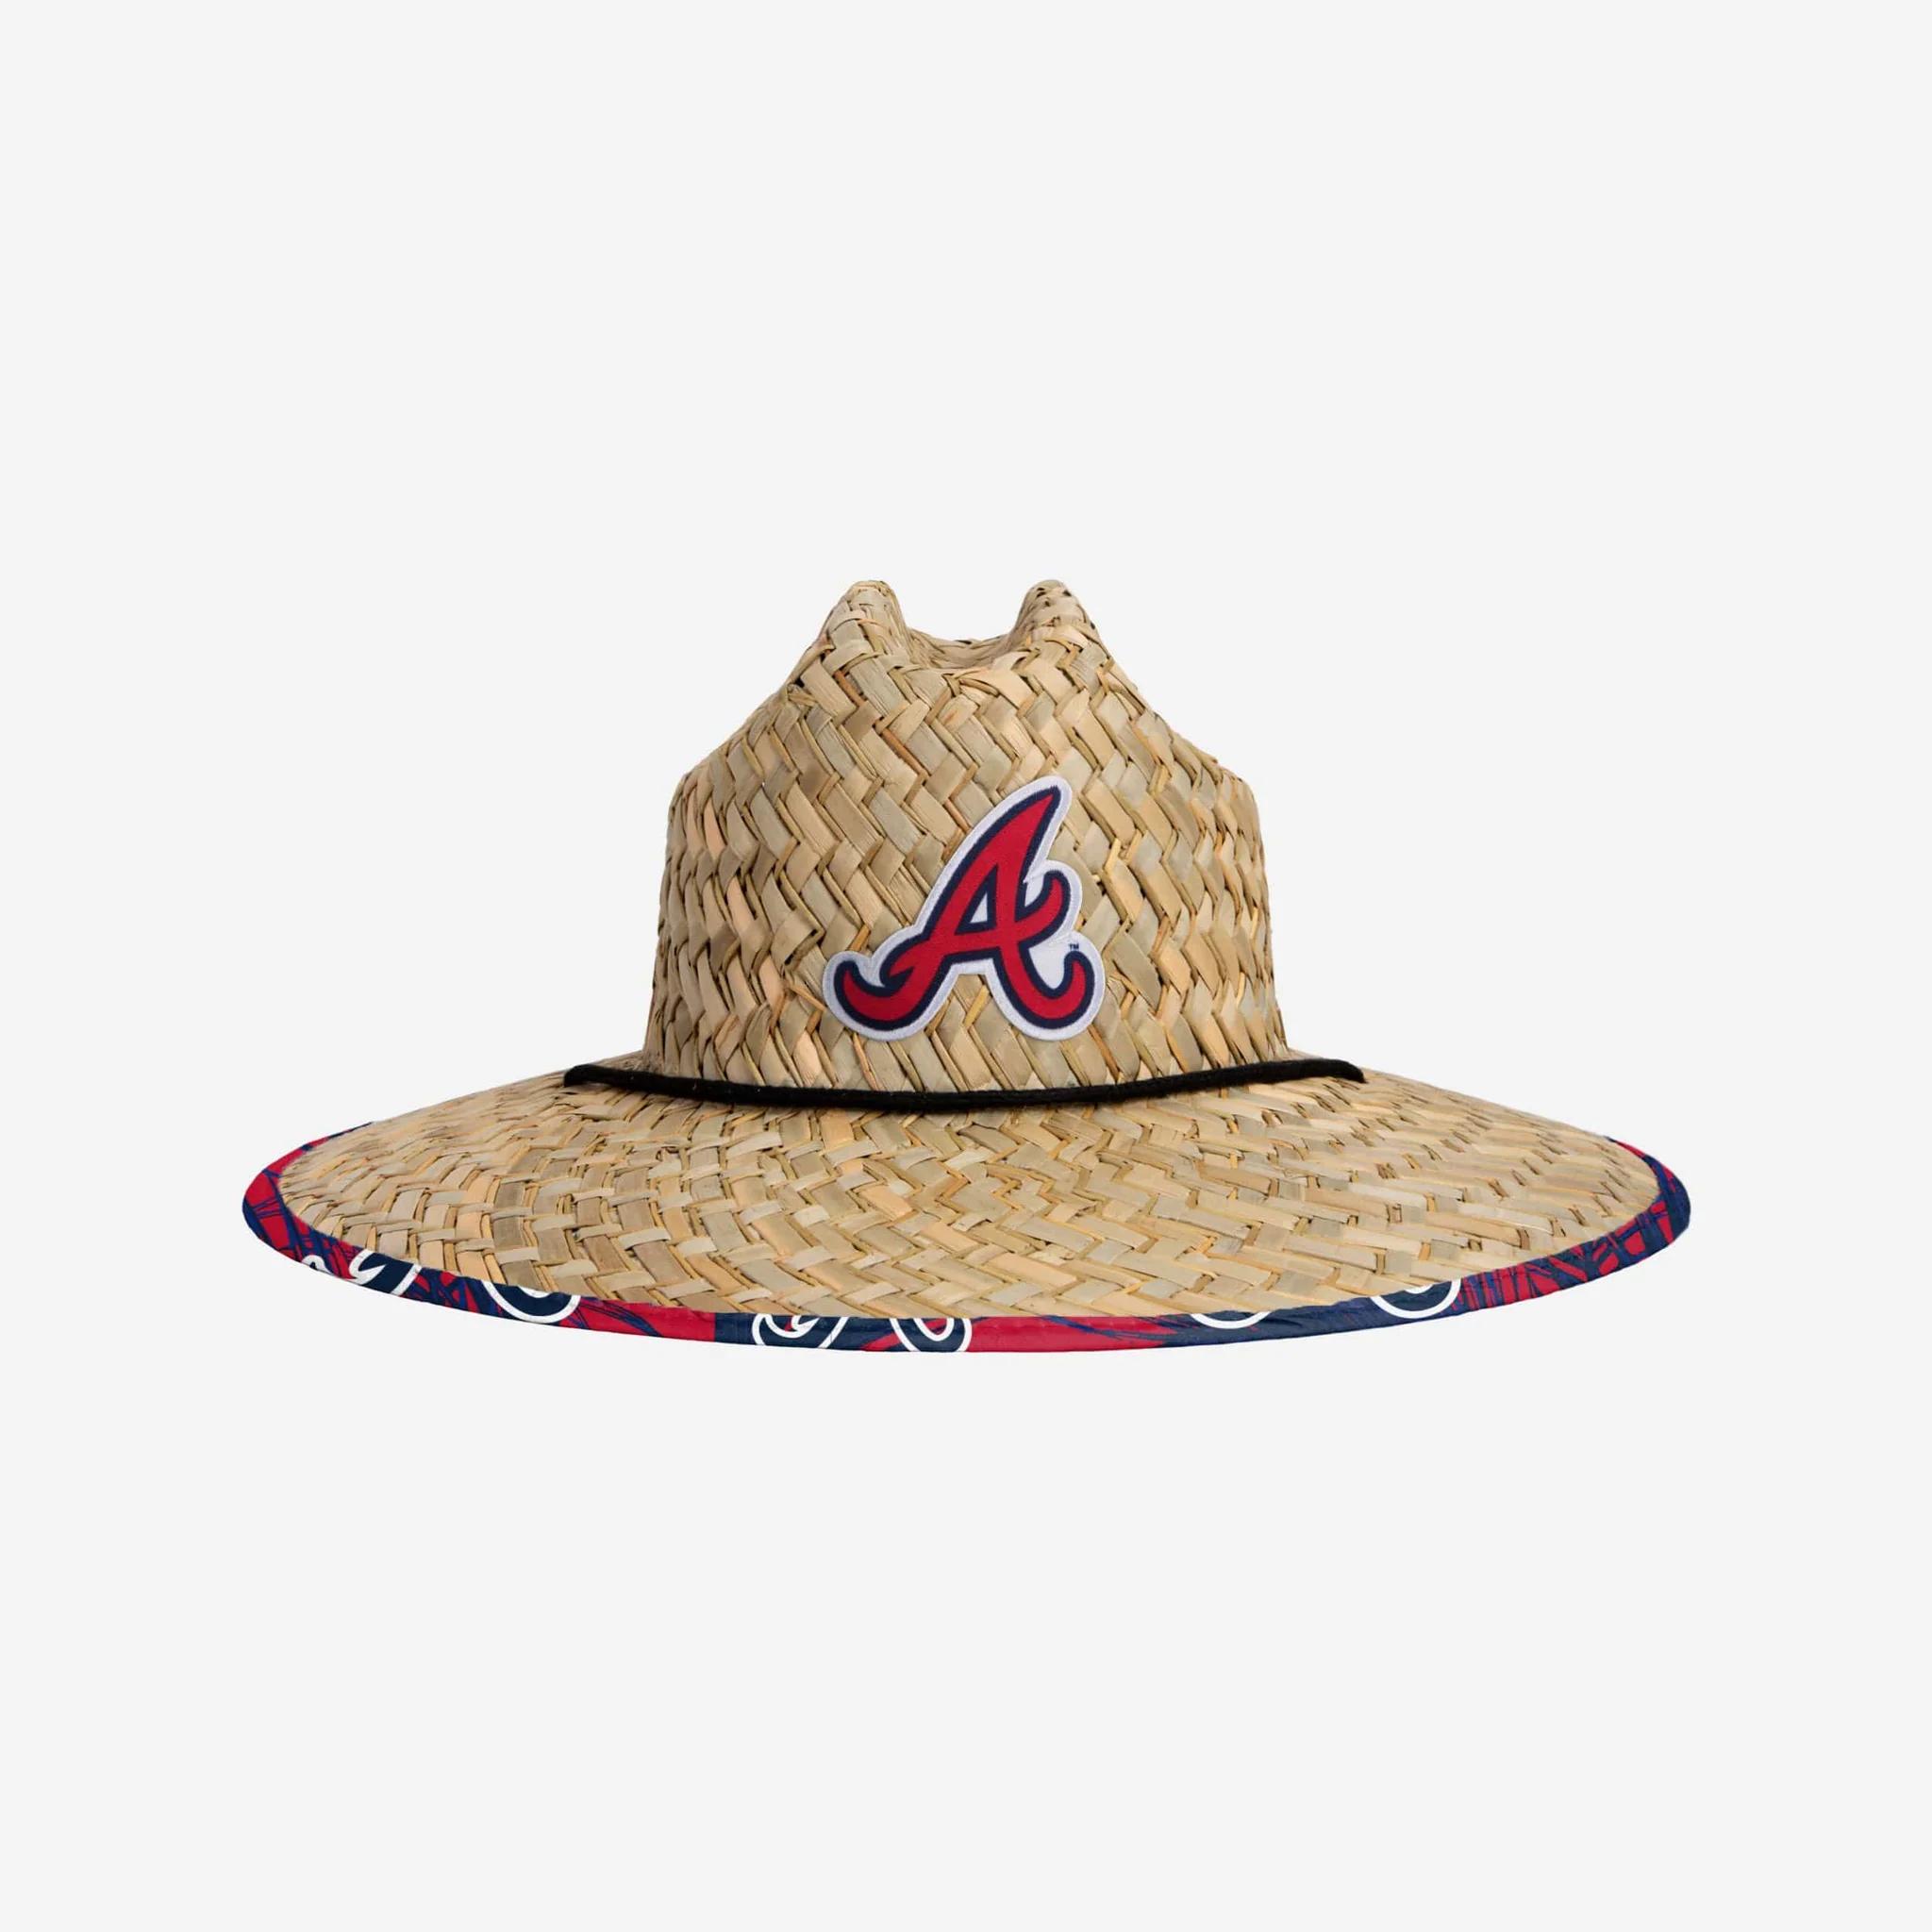 Grab the Best Officially Licensed Braves Gear for The 2023